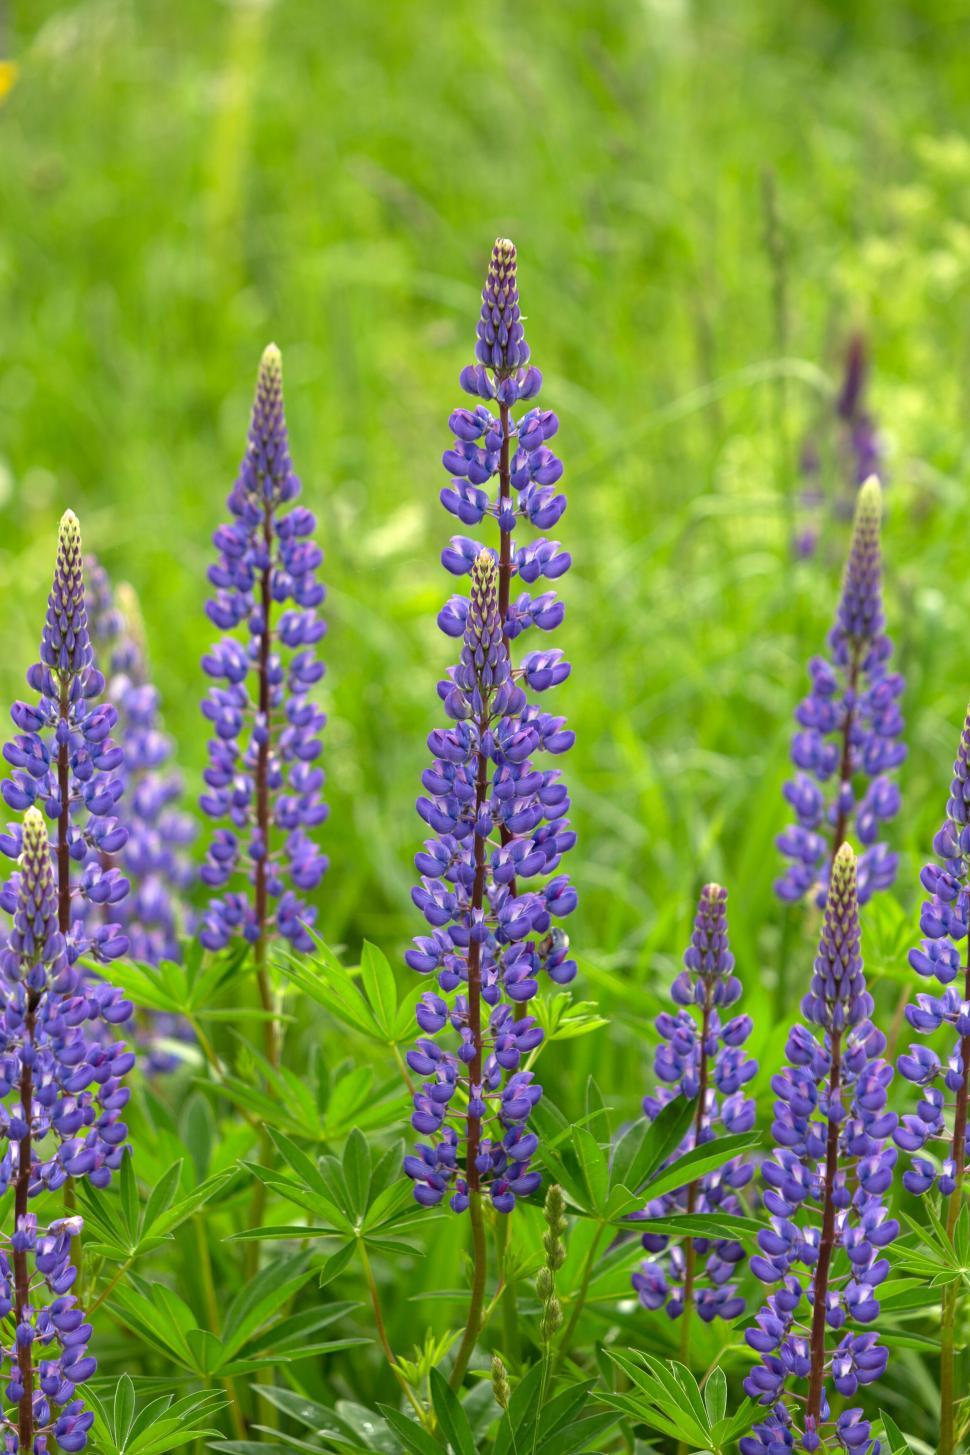 Free Image of Lupine flowers blooming in a vibrant green field 